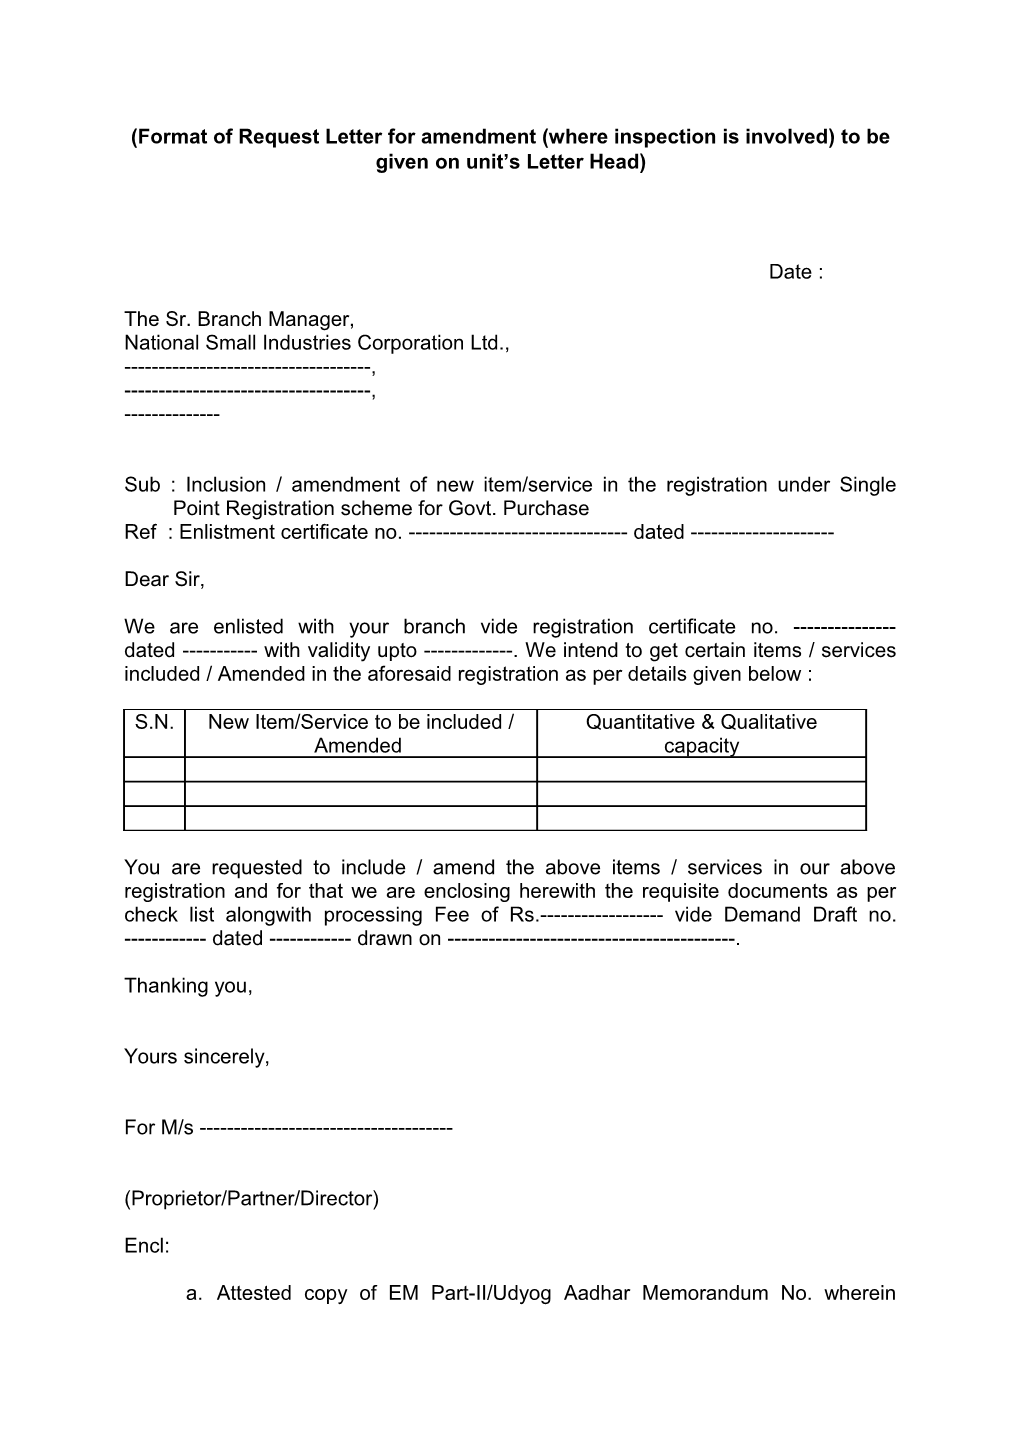 (Format of Request Letter for Amendment (Where Inspection Is Involved) to Be Given On